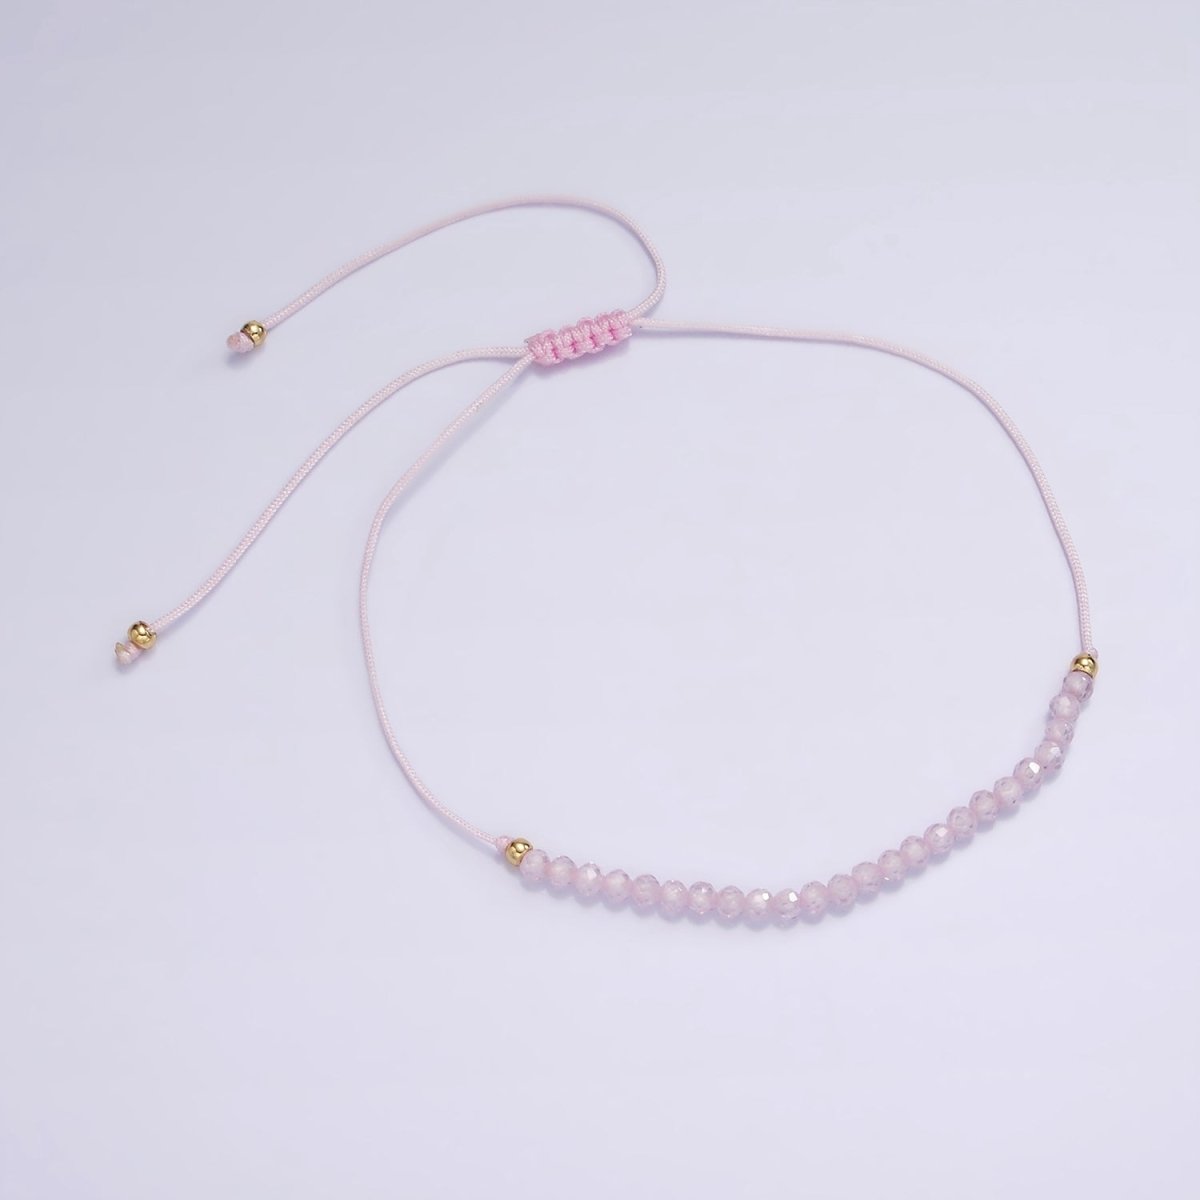 Pink Friendship Bracelet Rope Cord Adjustable Bracelet For Women with Gold Beads | WA-2212 - WA-2214 Clearance Pricing - DLUXCA